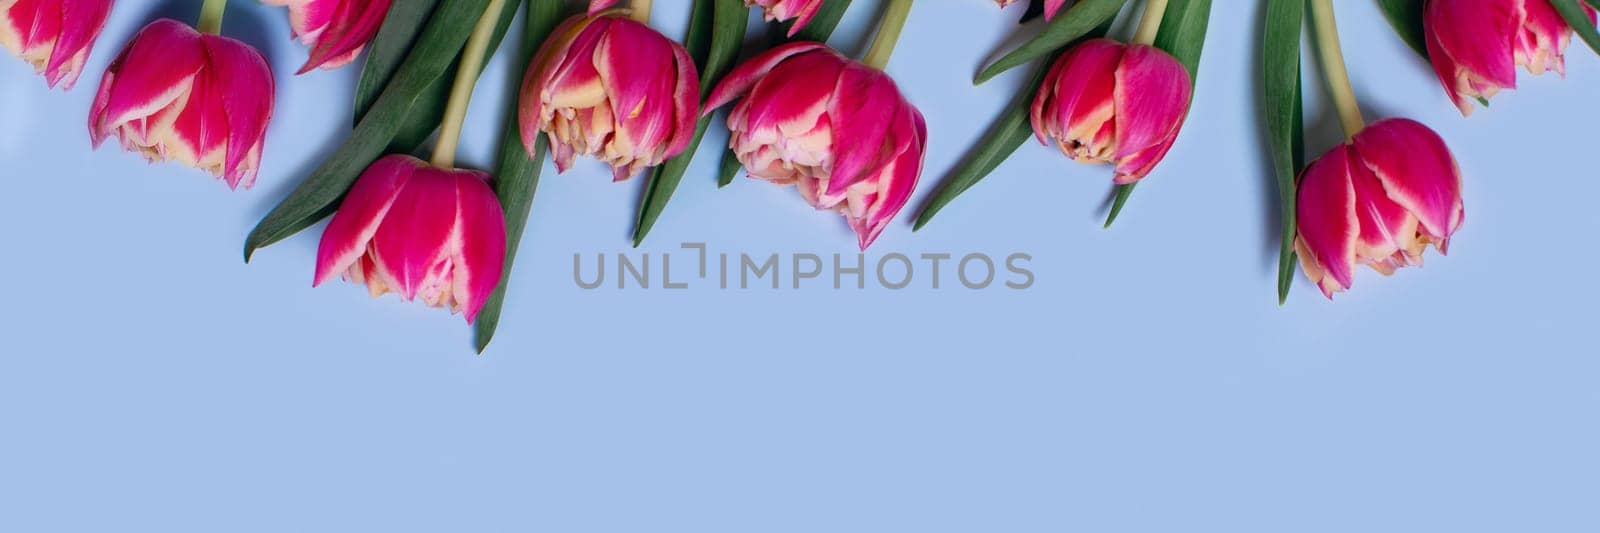 Greeting web banner with bouquet of tulips on blue background and place for your text.